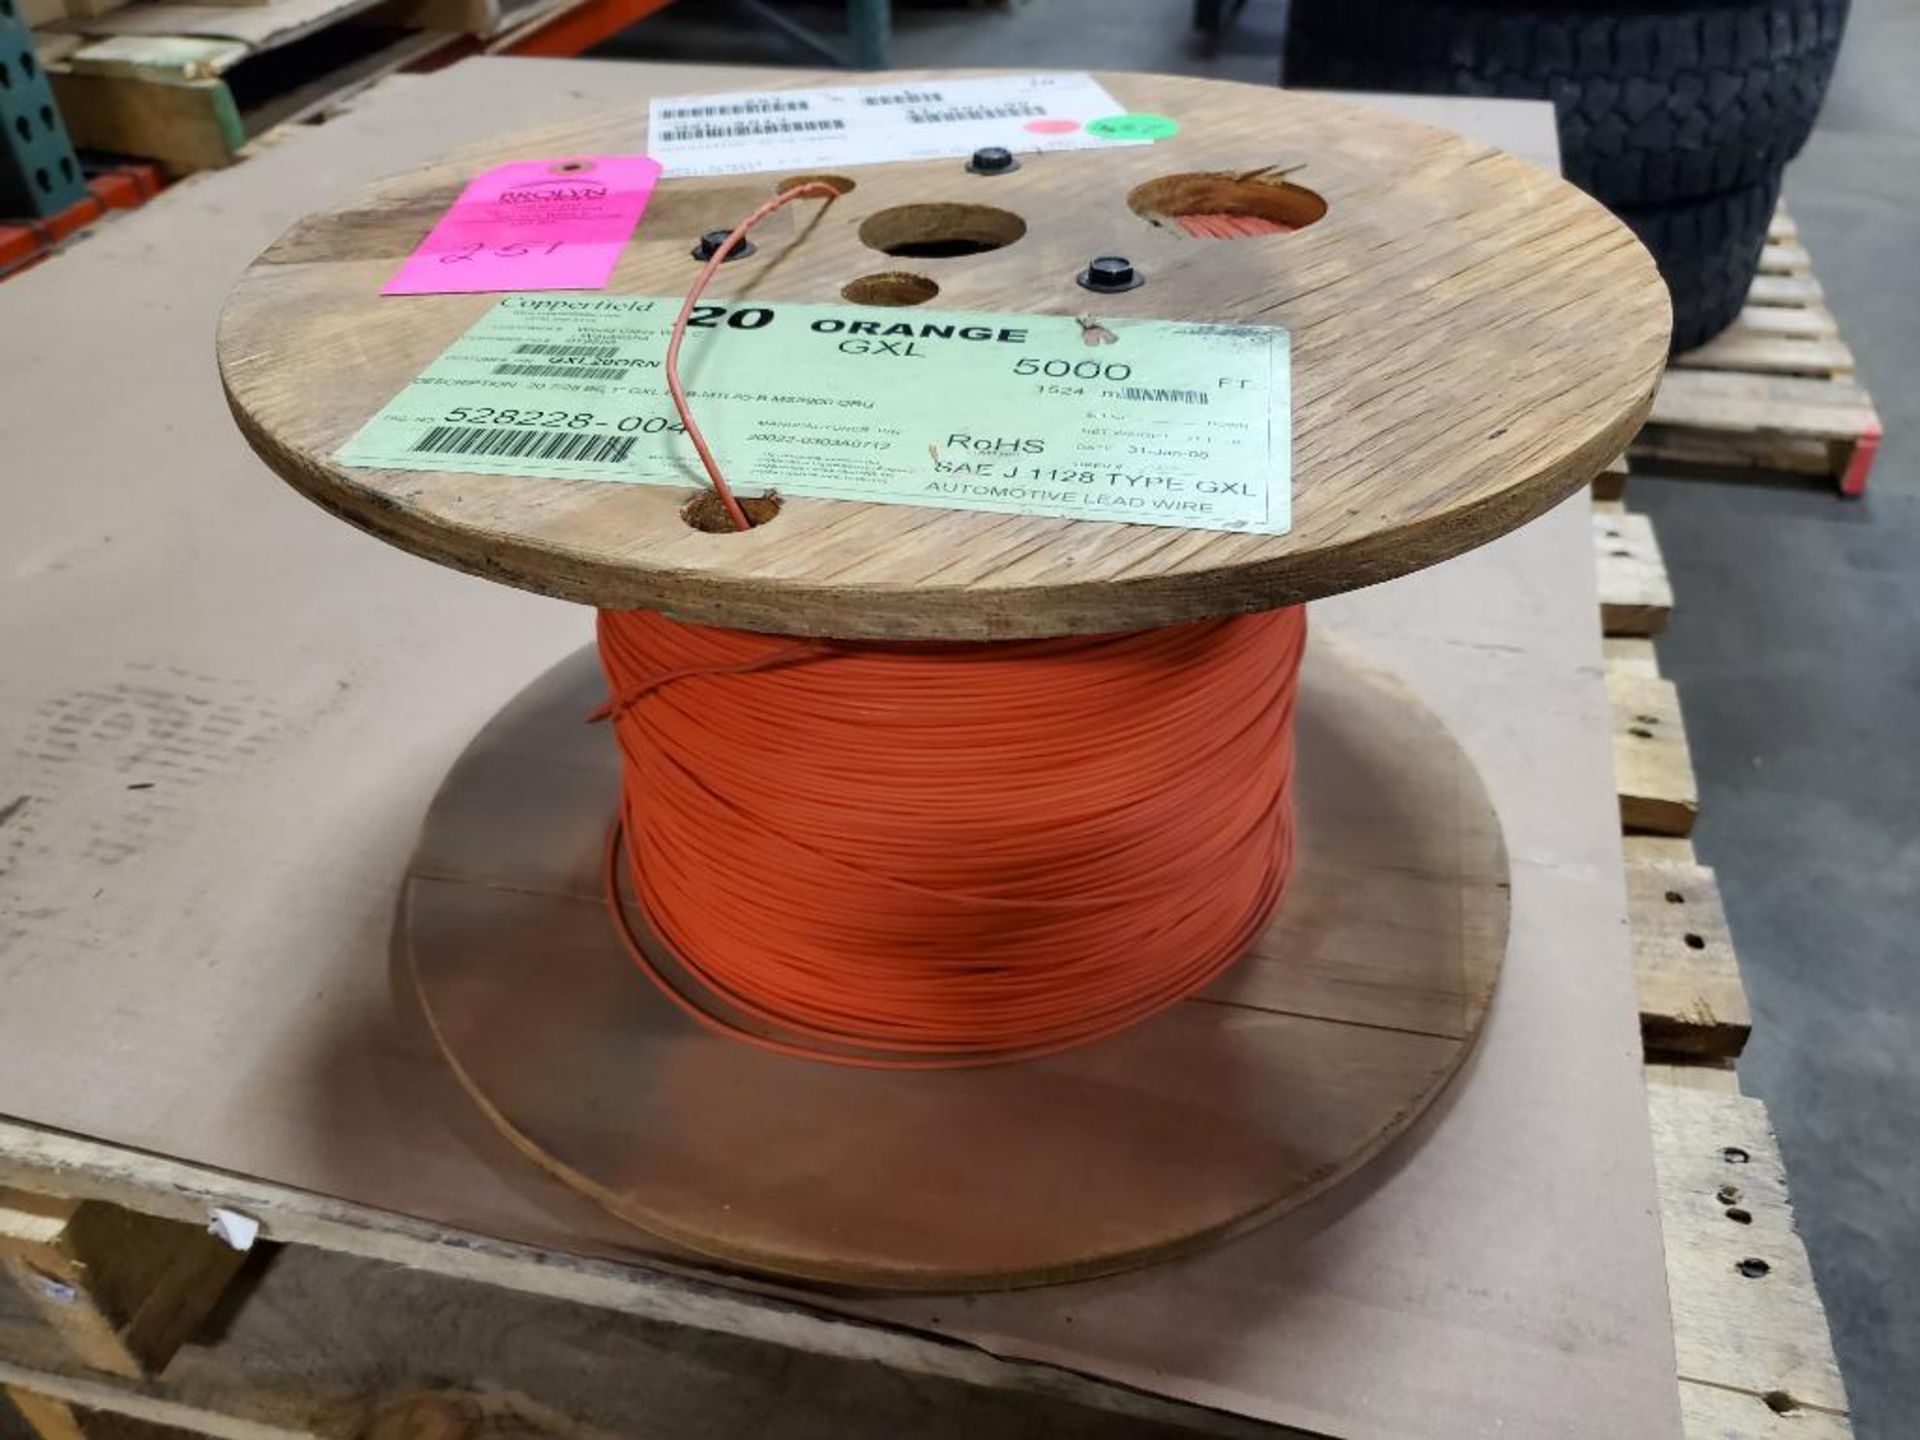 25lbs Partial roll of 20 gauge orange stranded copper wire. Gross roll weight including spool.